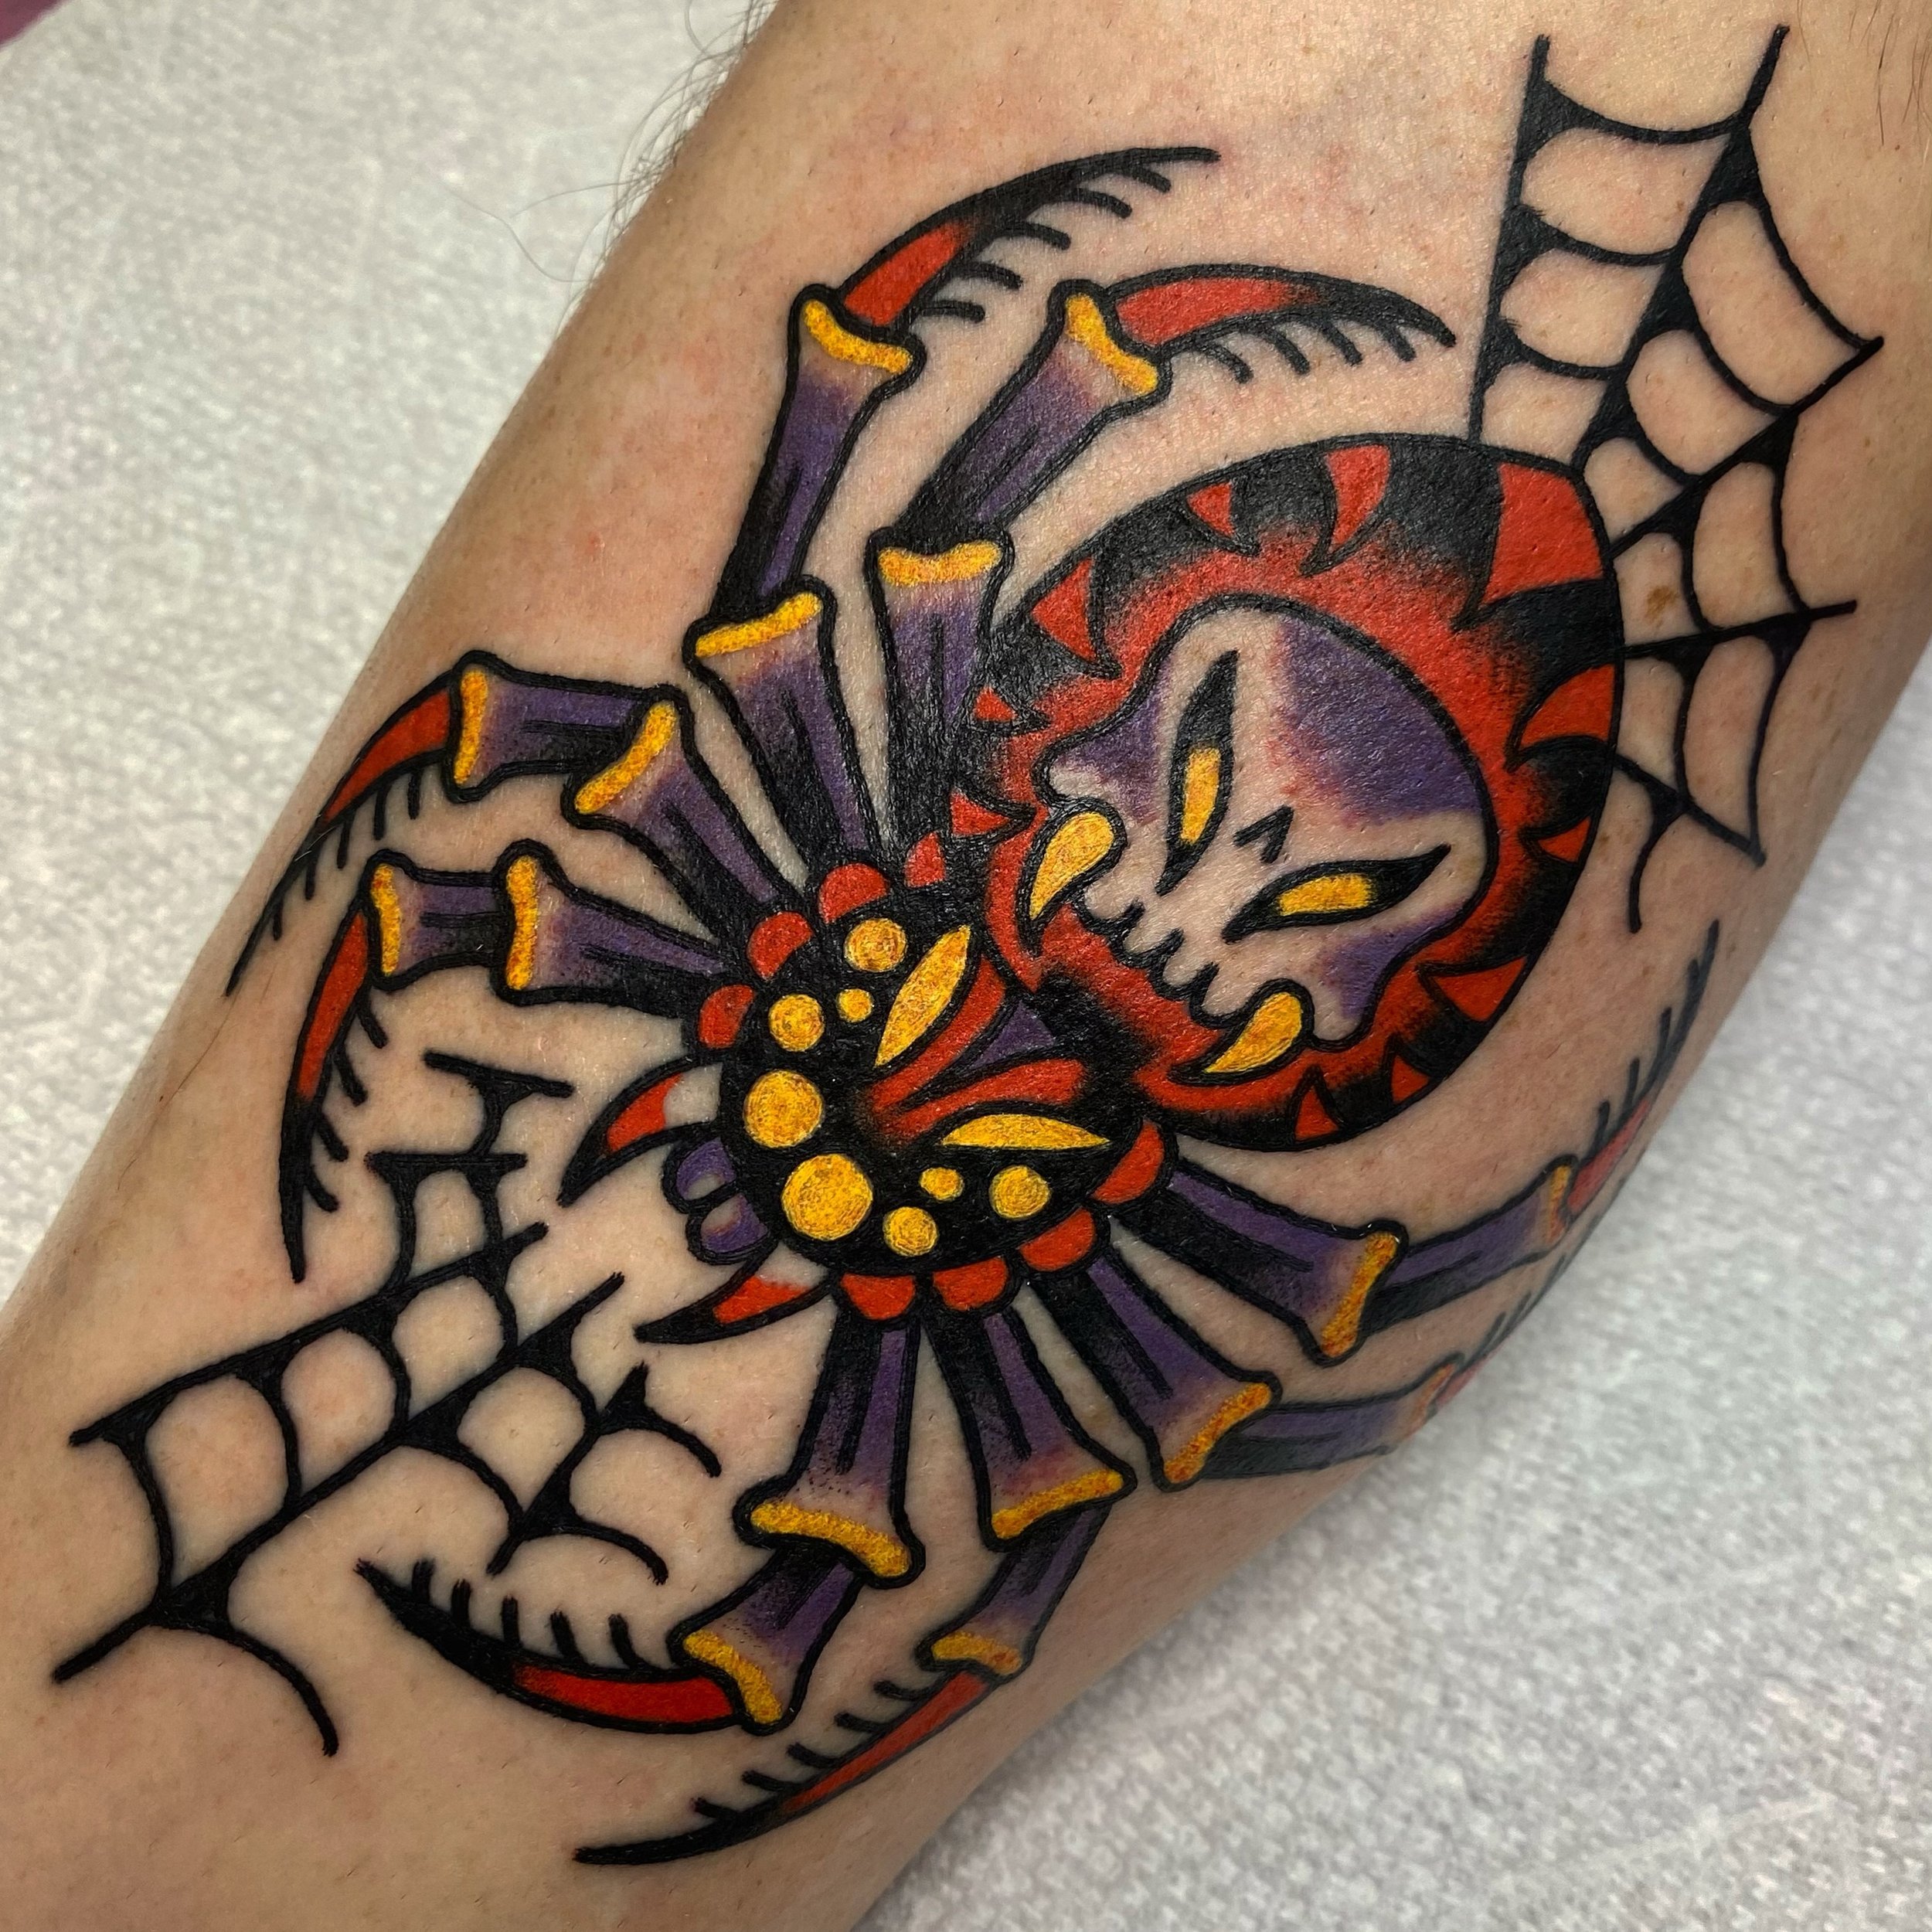 spider 🕸️

❤️ books open / walk ins thurs-mon
📍@downtowntattoolasvegas
🔗 check &lsquo;booking&rsquo; highlight to book in
‼️check spam for reply

UPCOMING GUEST SPOTS + EVENTS :

✨PHOENIX, AZ
May 18-19th
@spottedpanthertattoo
*fully booked - comme